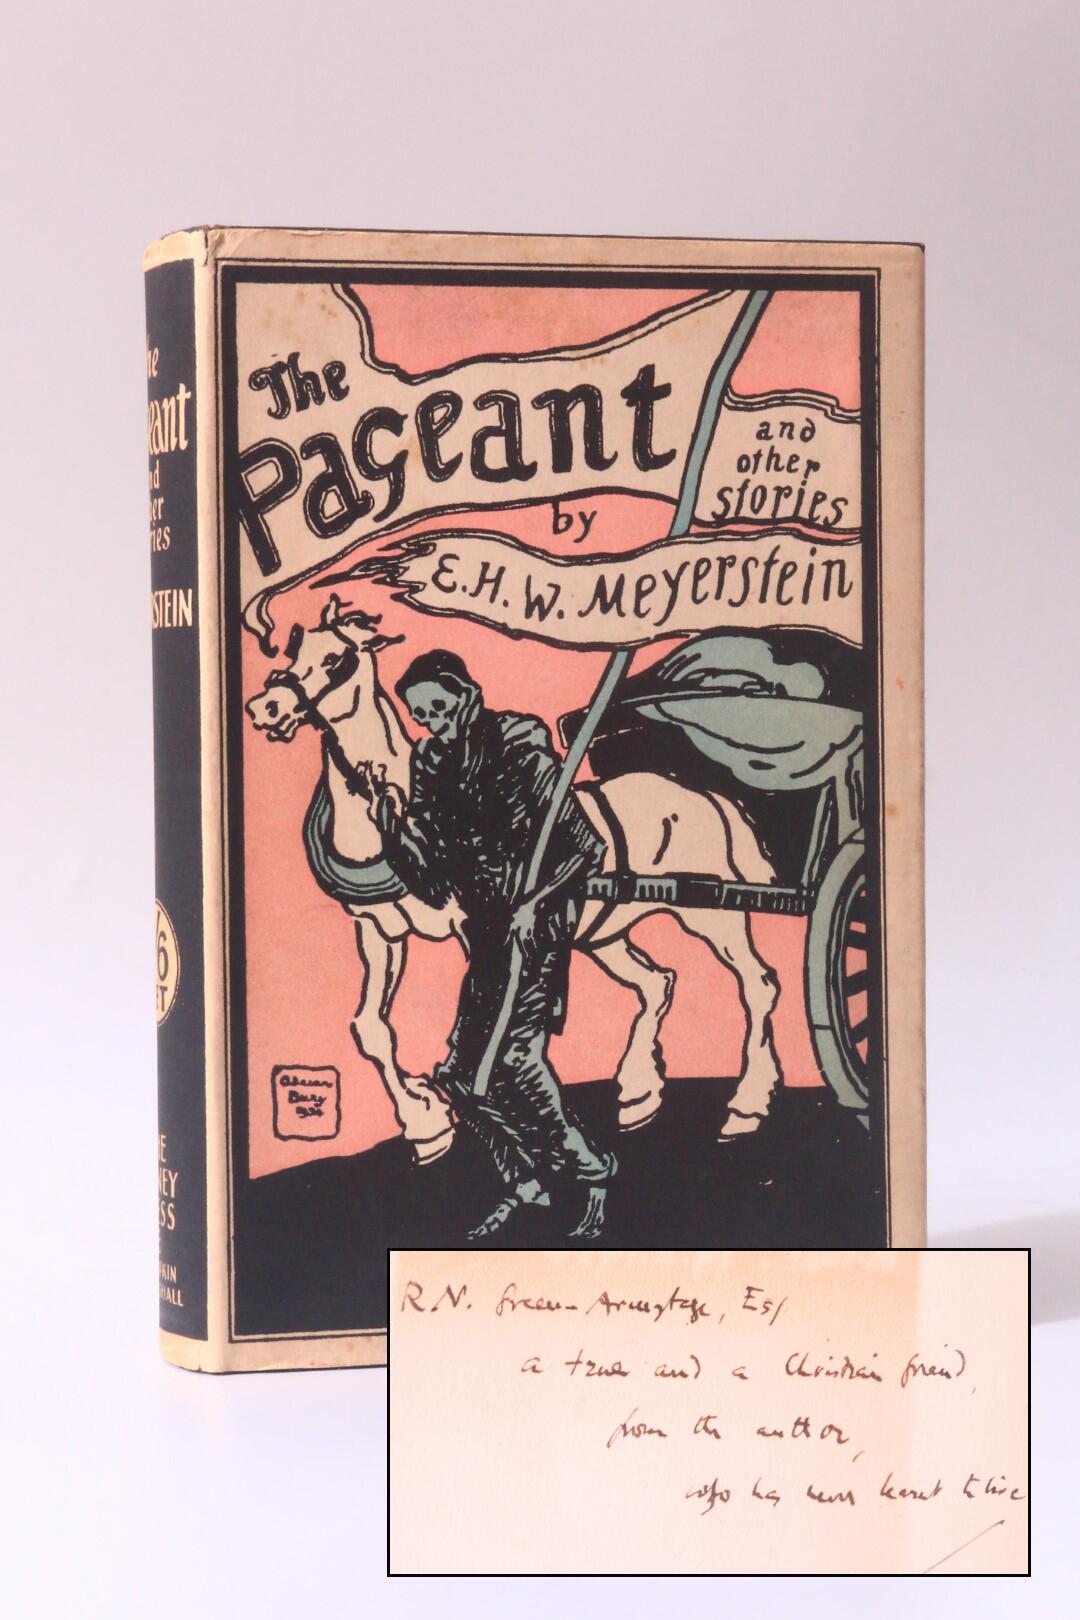 E.H.W. Meyerstein - The Pageant and Other Stories - The Sidney Press / Simpkin Marshall, n.d. [1934], Signed First Edition.